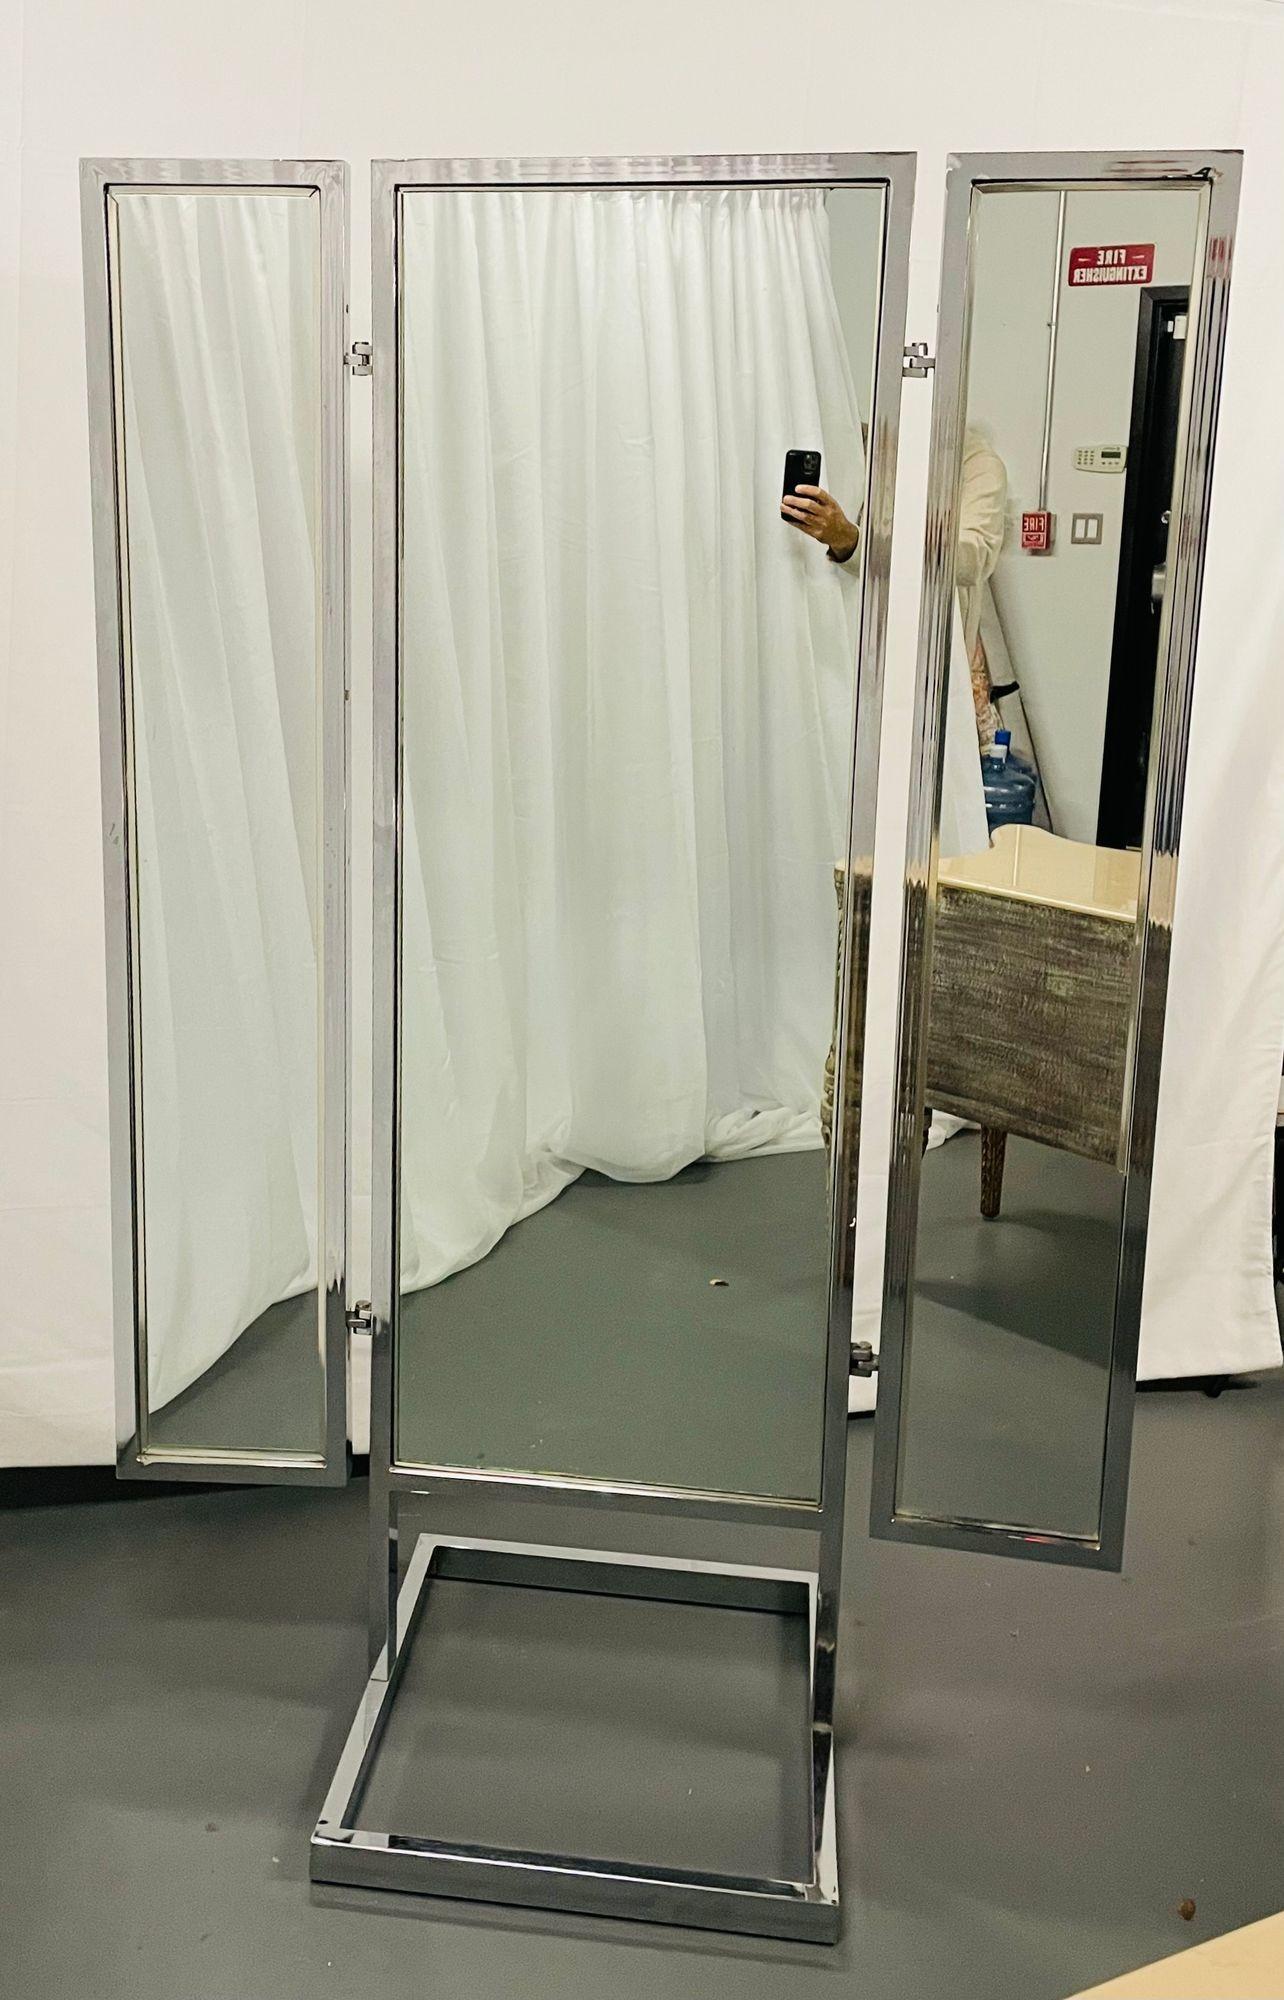 A Mid Century Modern Trifold Cheval Mirror, Steel and Chrome Framed, Reversable
 
A Standing Tri fold Mirror that is finished on all sides making this rare and highly functional mirror capable of standing in the center of your home or clothing